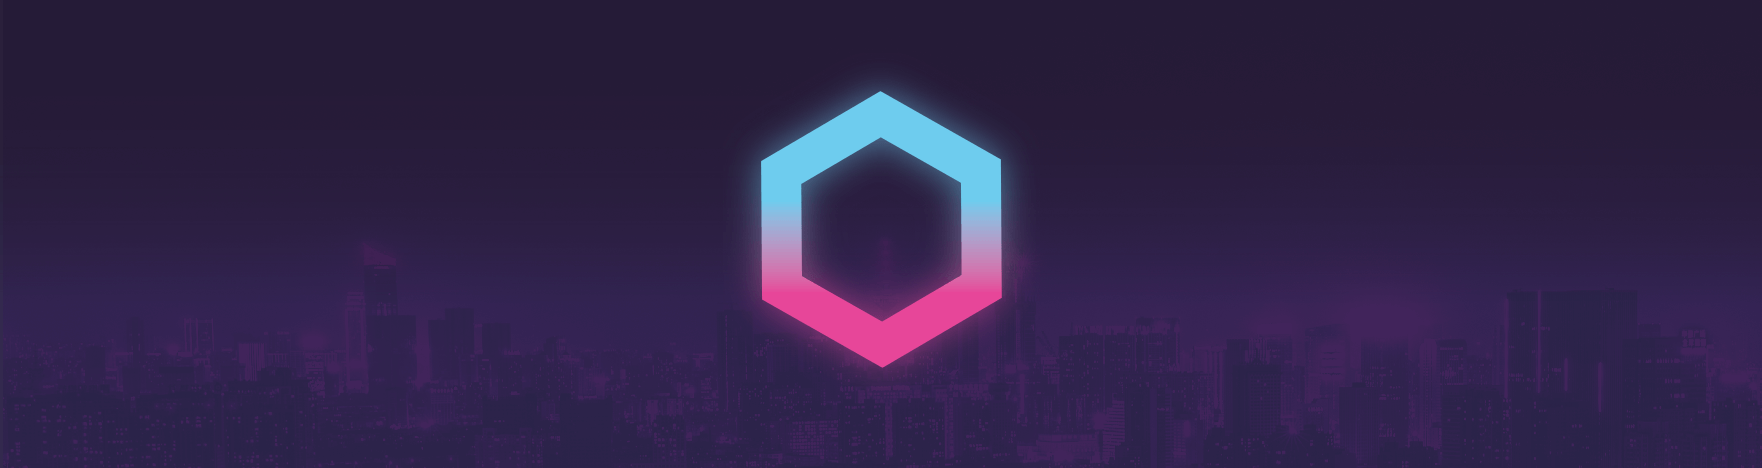 The Synthwave 84 logo banner